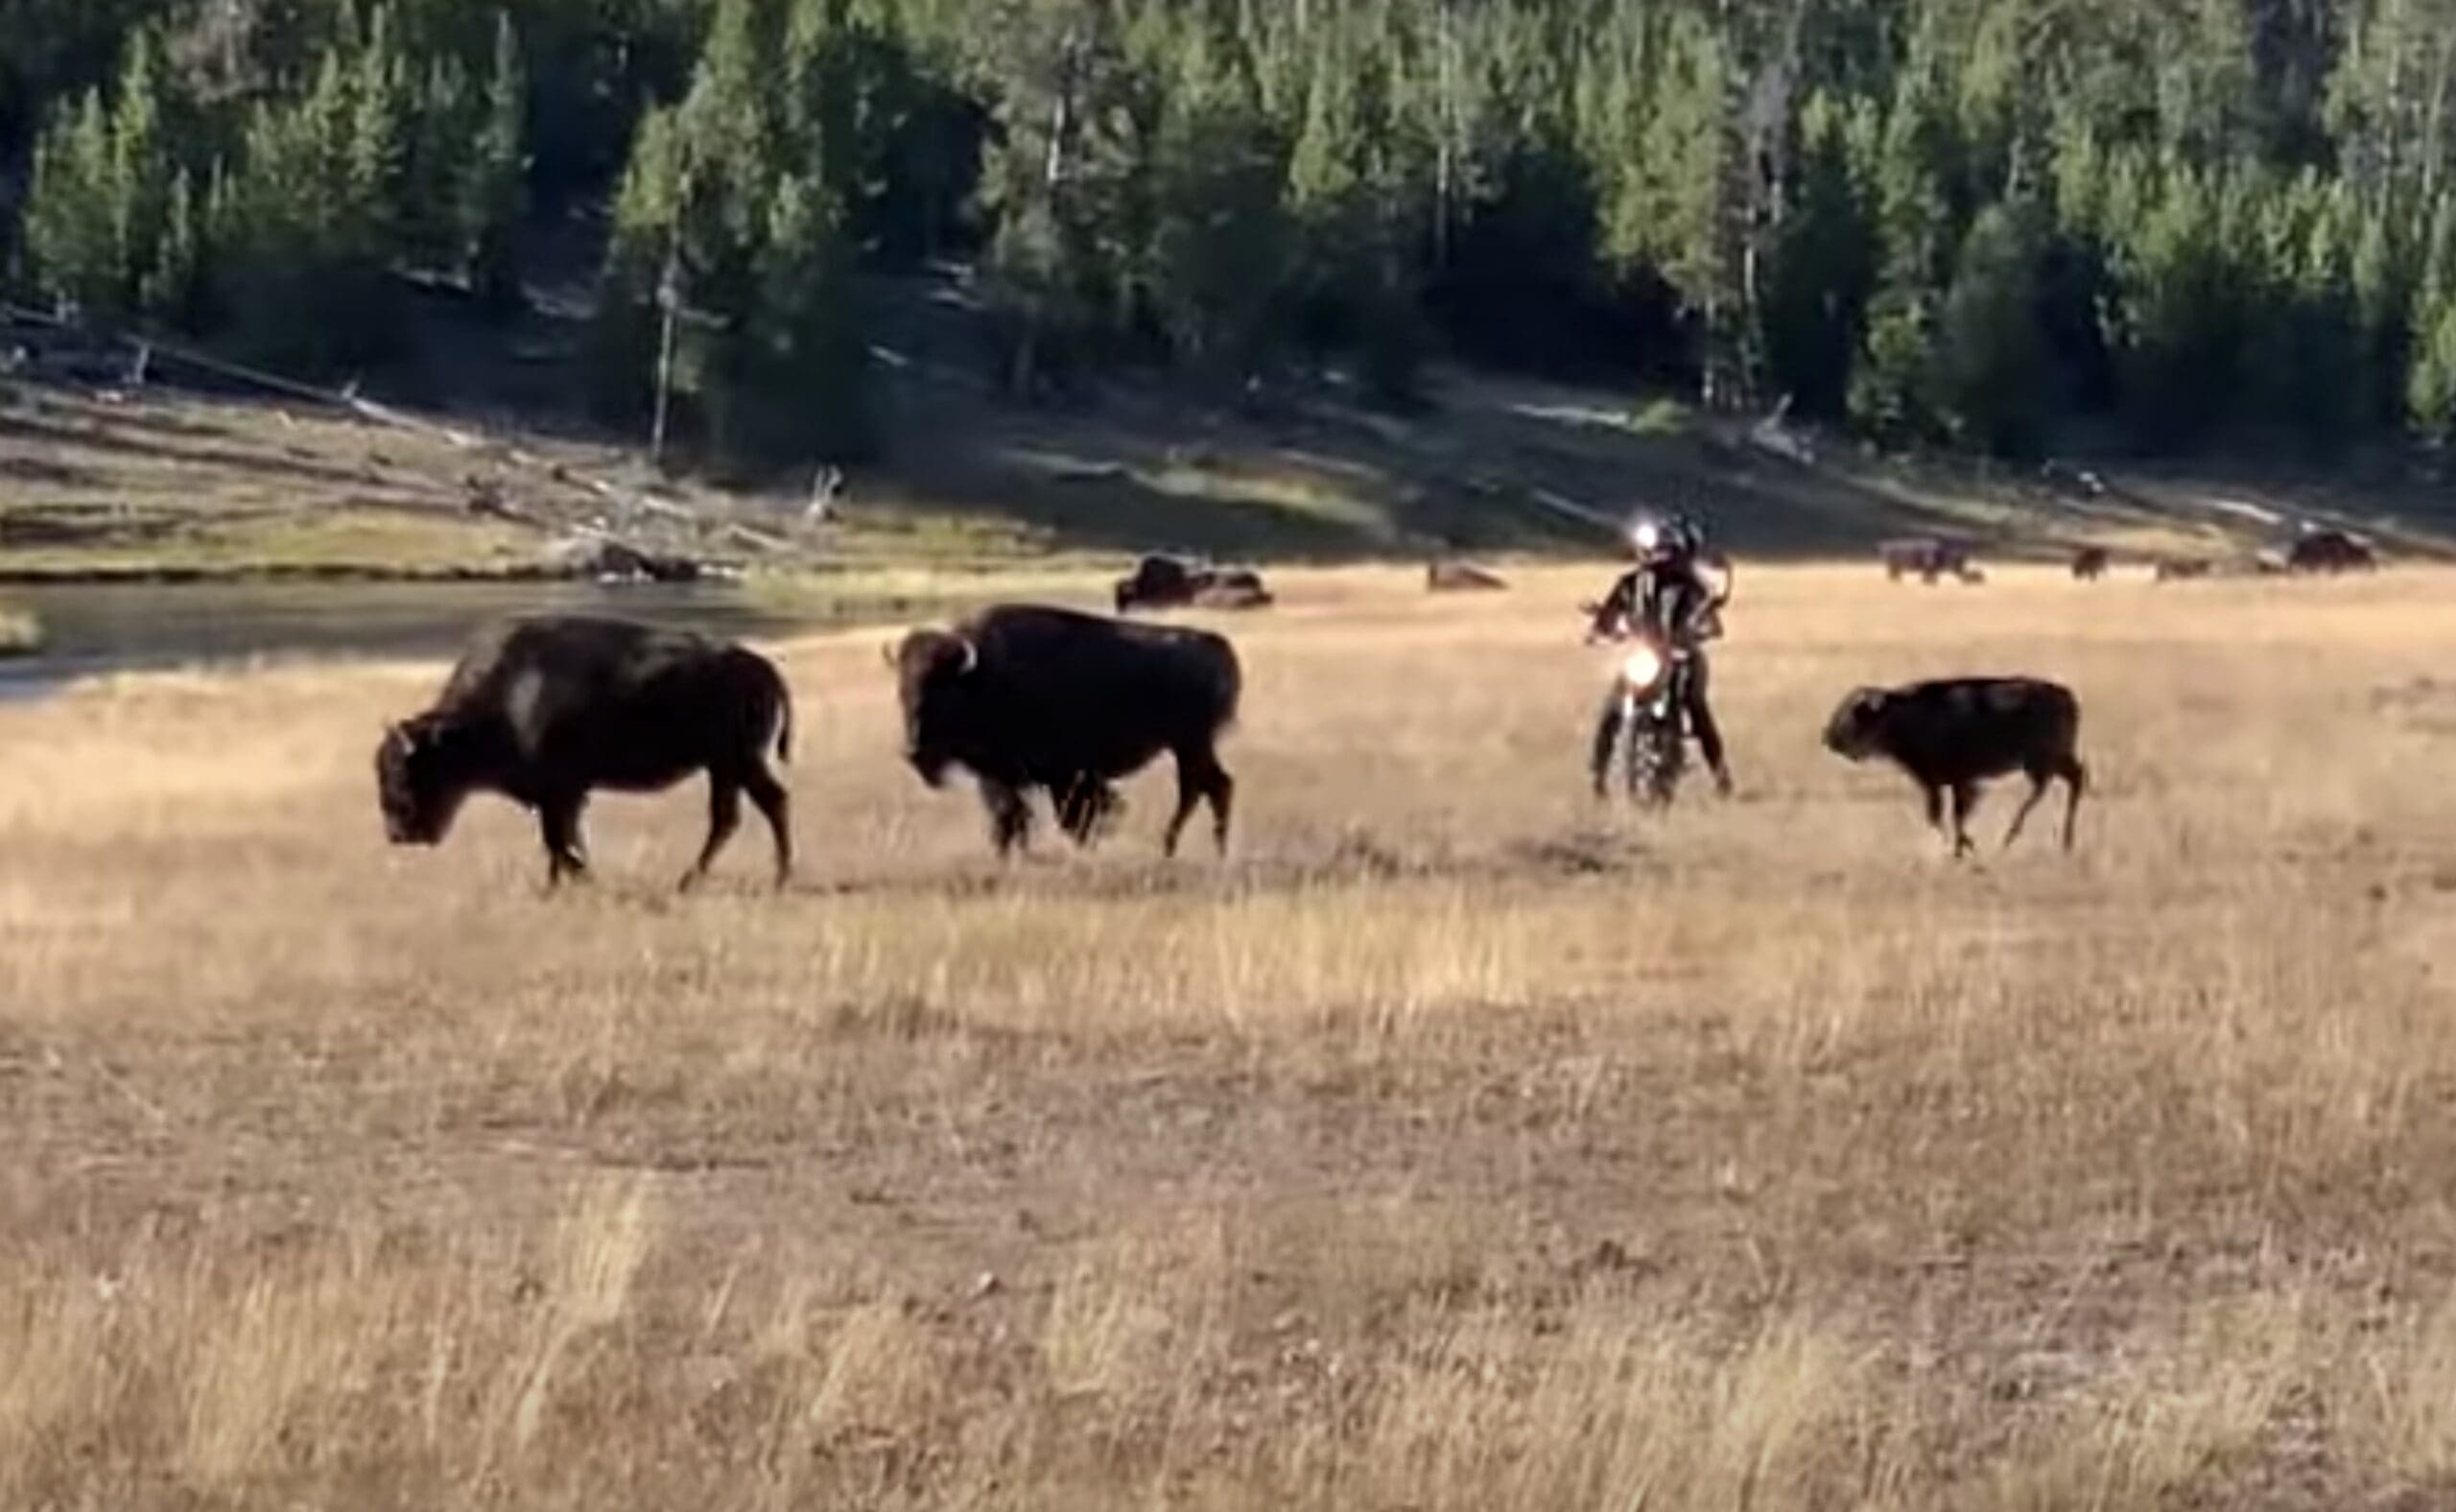 Video Shows Motorcyclists Harassing Bison Calves in Yellowstone